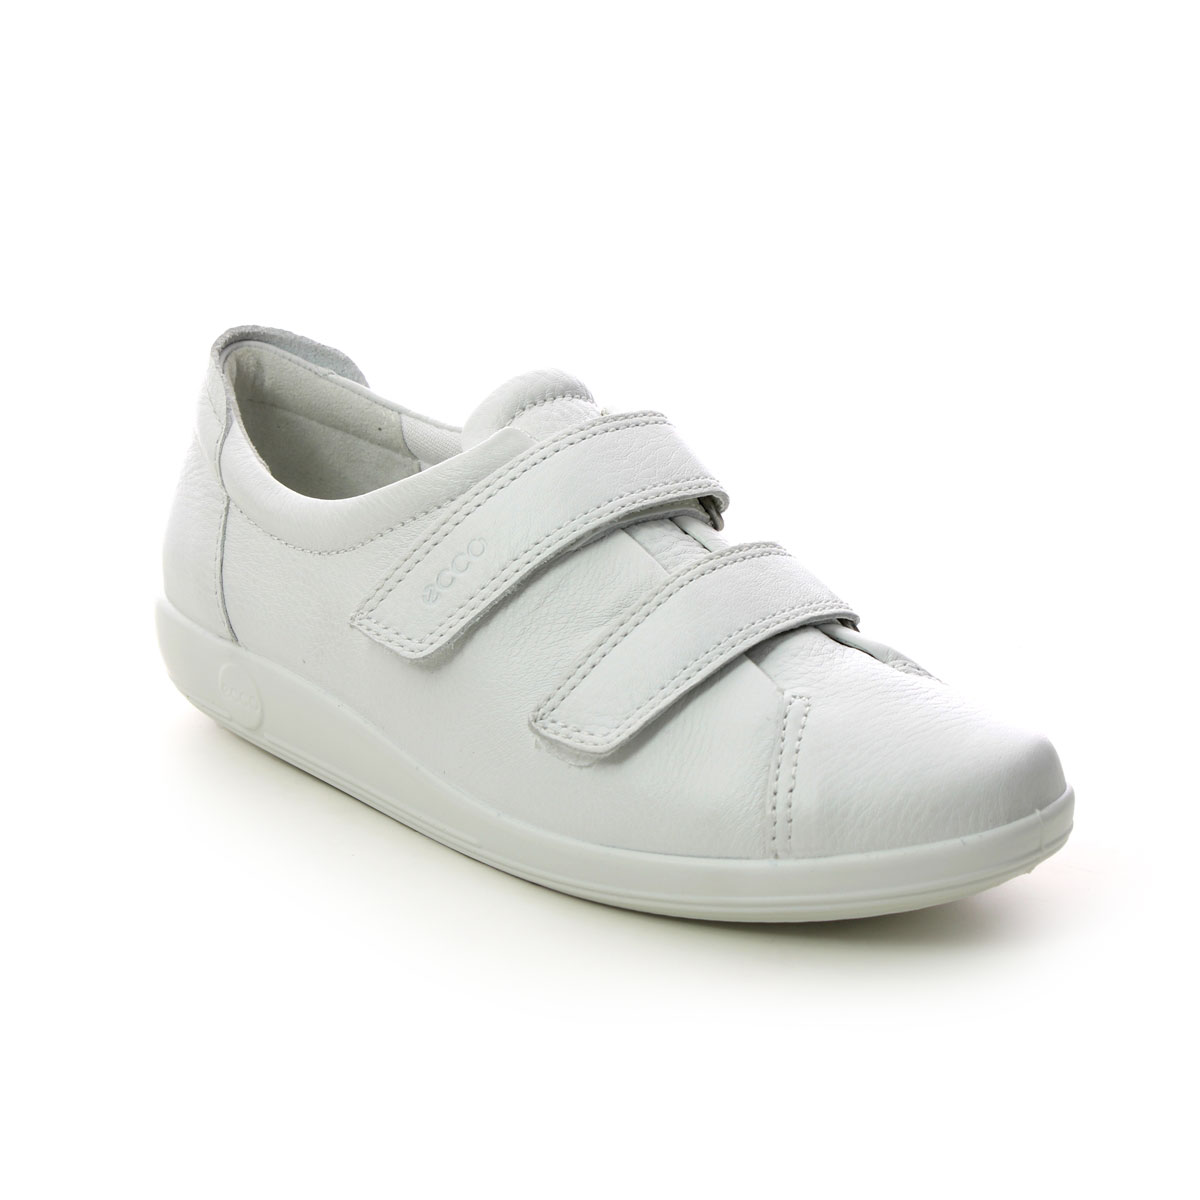 Ecco Soft 2.0 2V White Leather Womens Comfort Slip On Shoes 206513-01002 In Size 42 In Plain White Leather